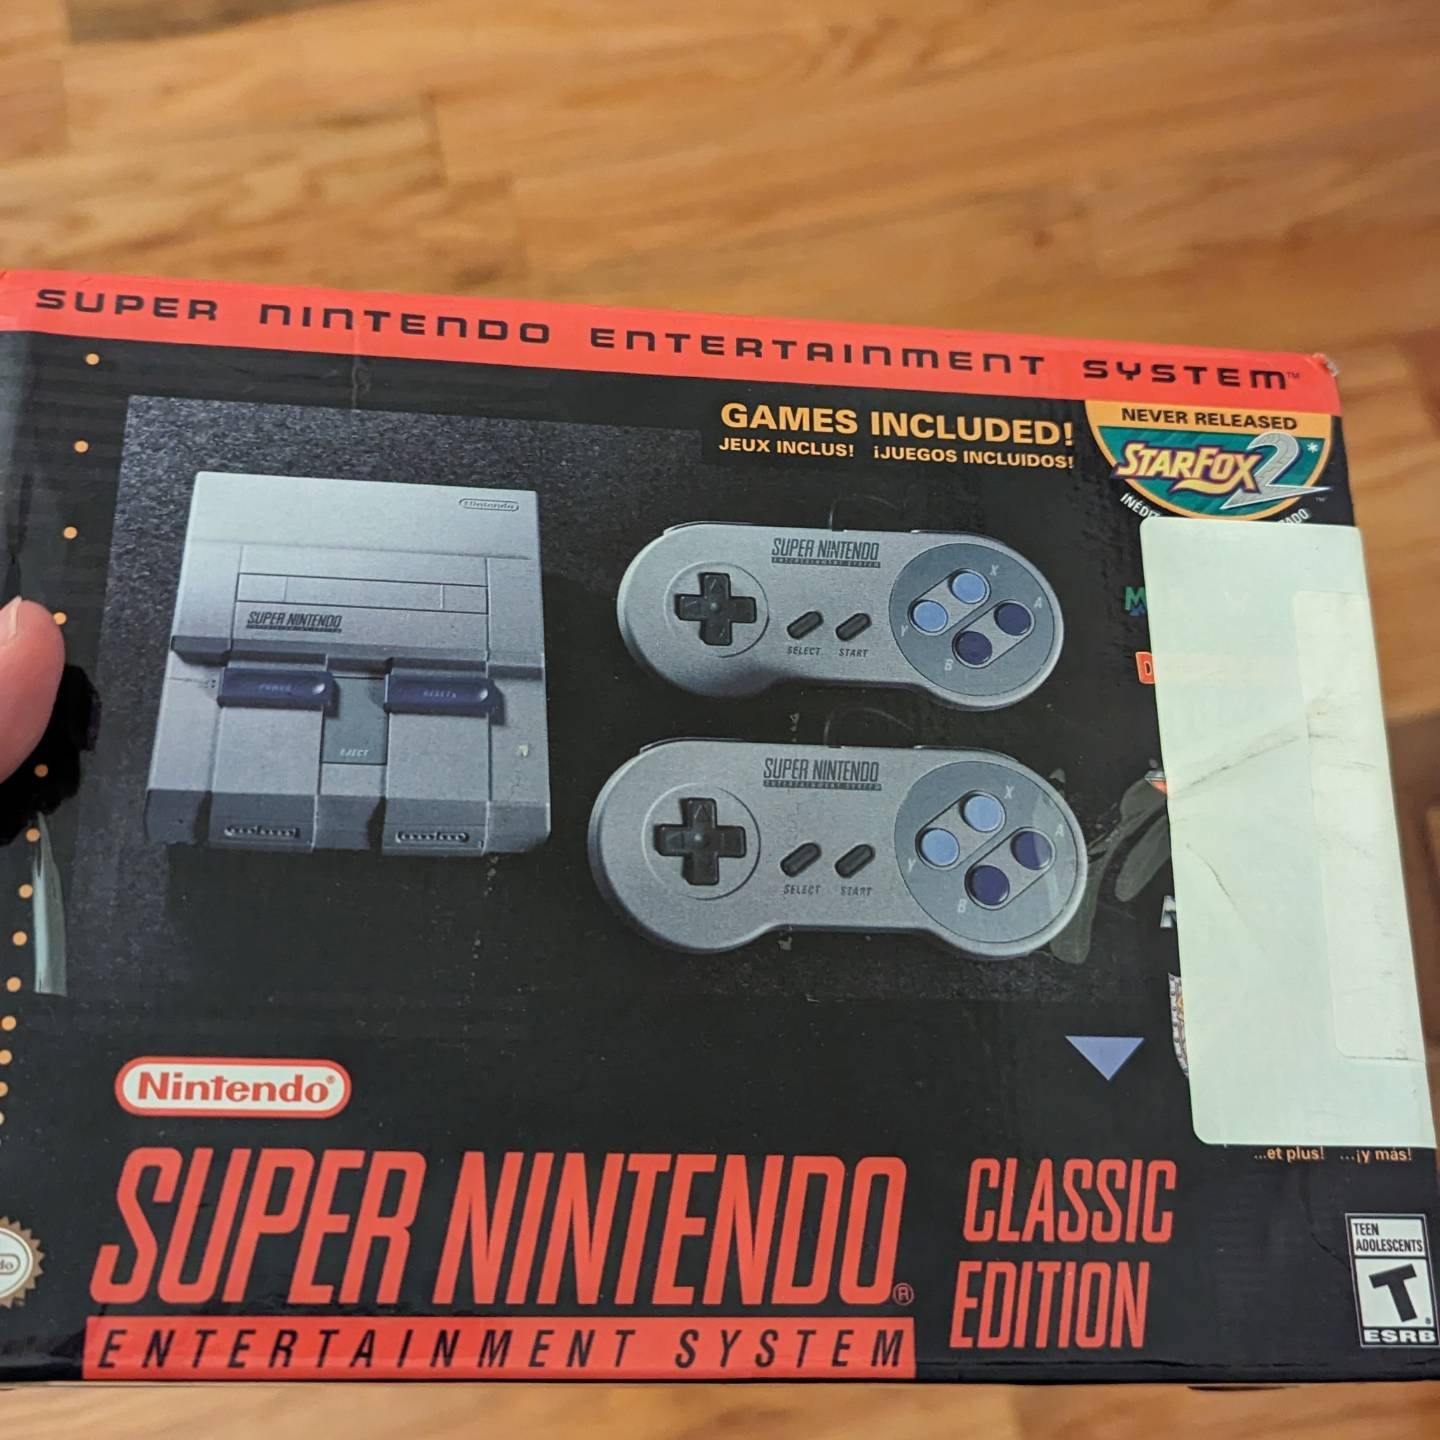 Giving away a Mini Super Nintendo and other surprises tonight at Supa Dupa, roll through after #dodgers #krushgroove ! Throwbacks Rap, Hip-hop and R&amp;B in #chinatownlosangeles #chinatown Discount tickets at supadupala.com